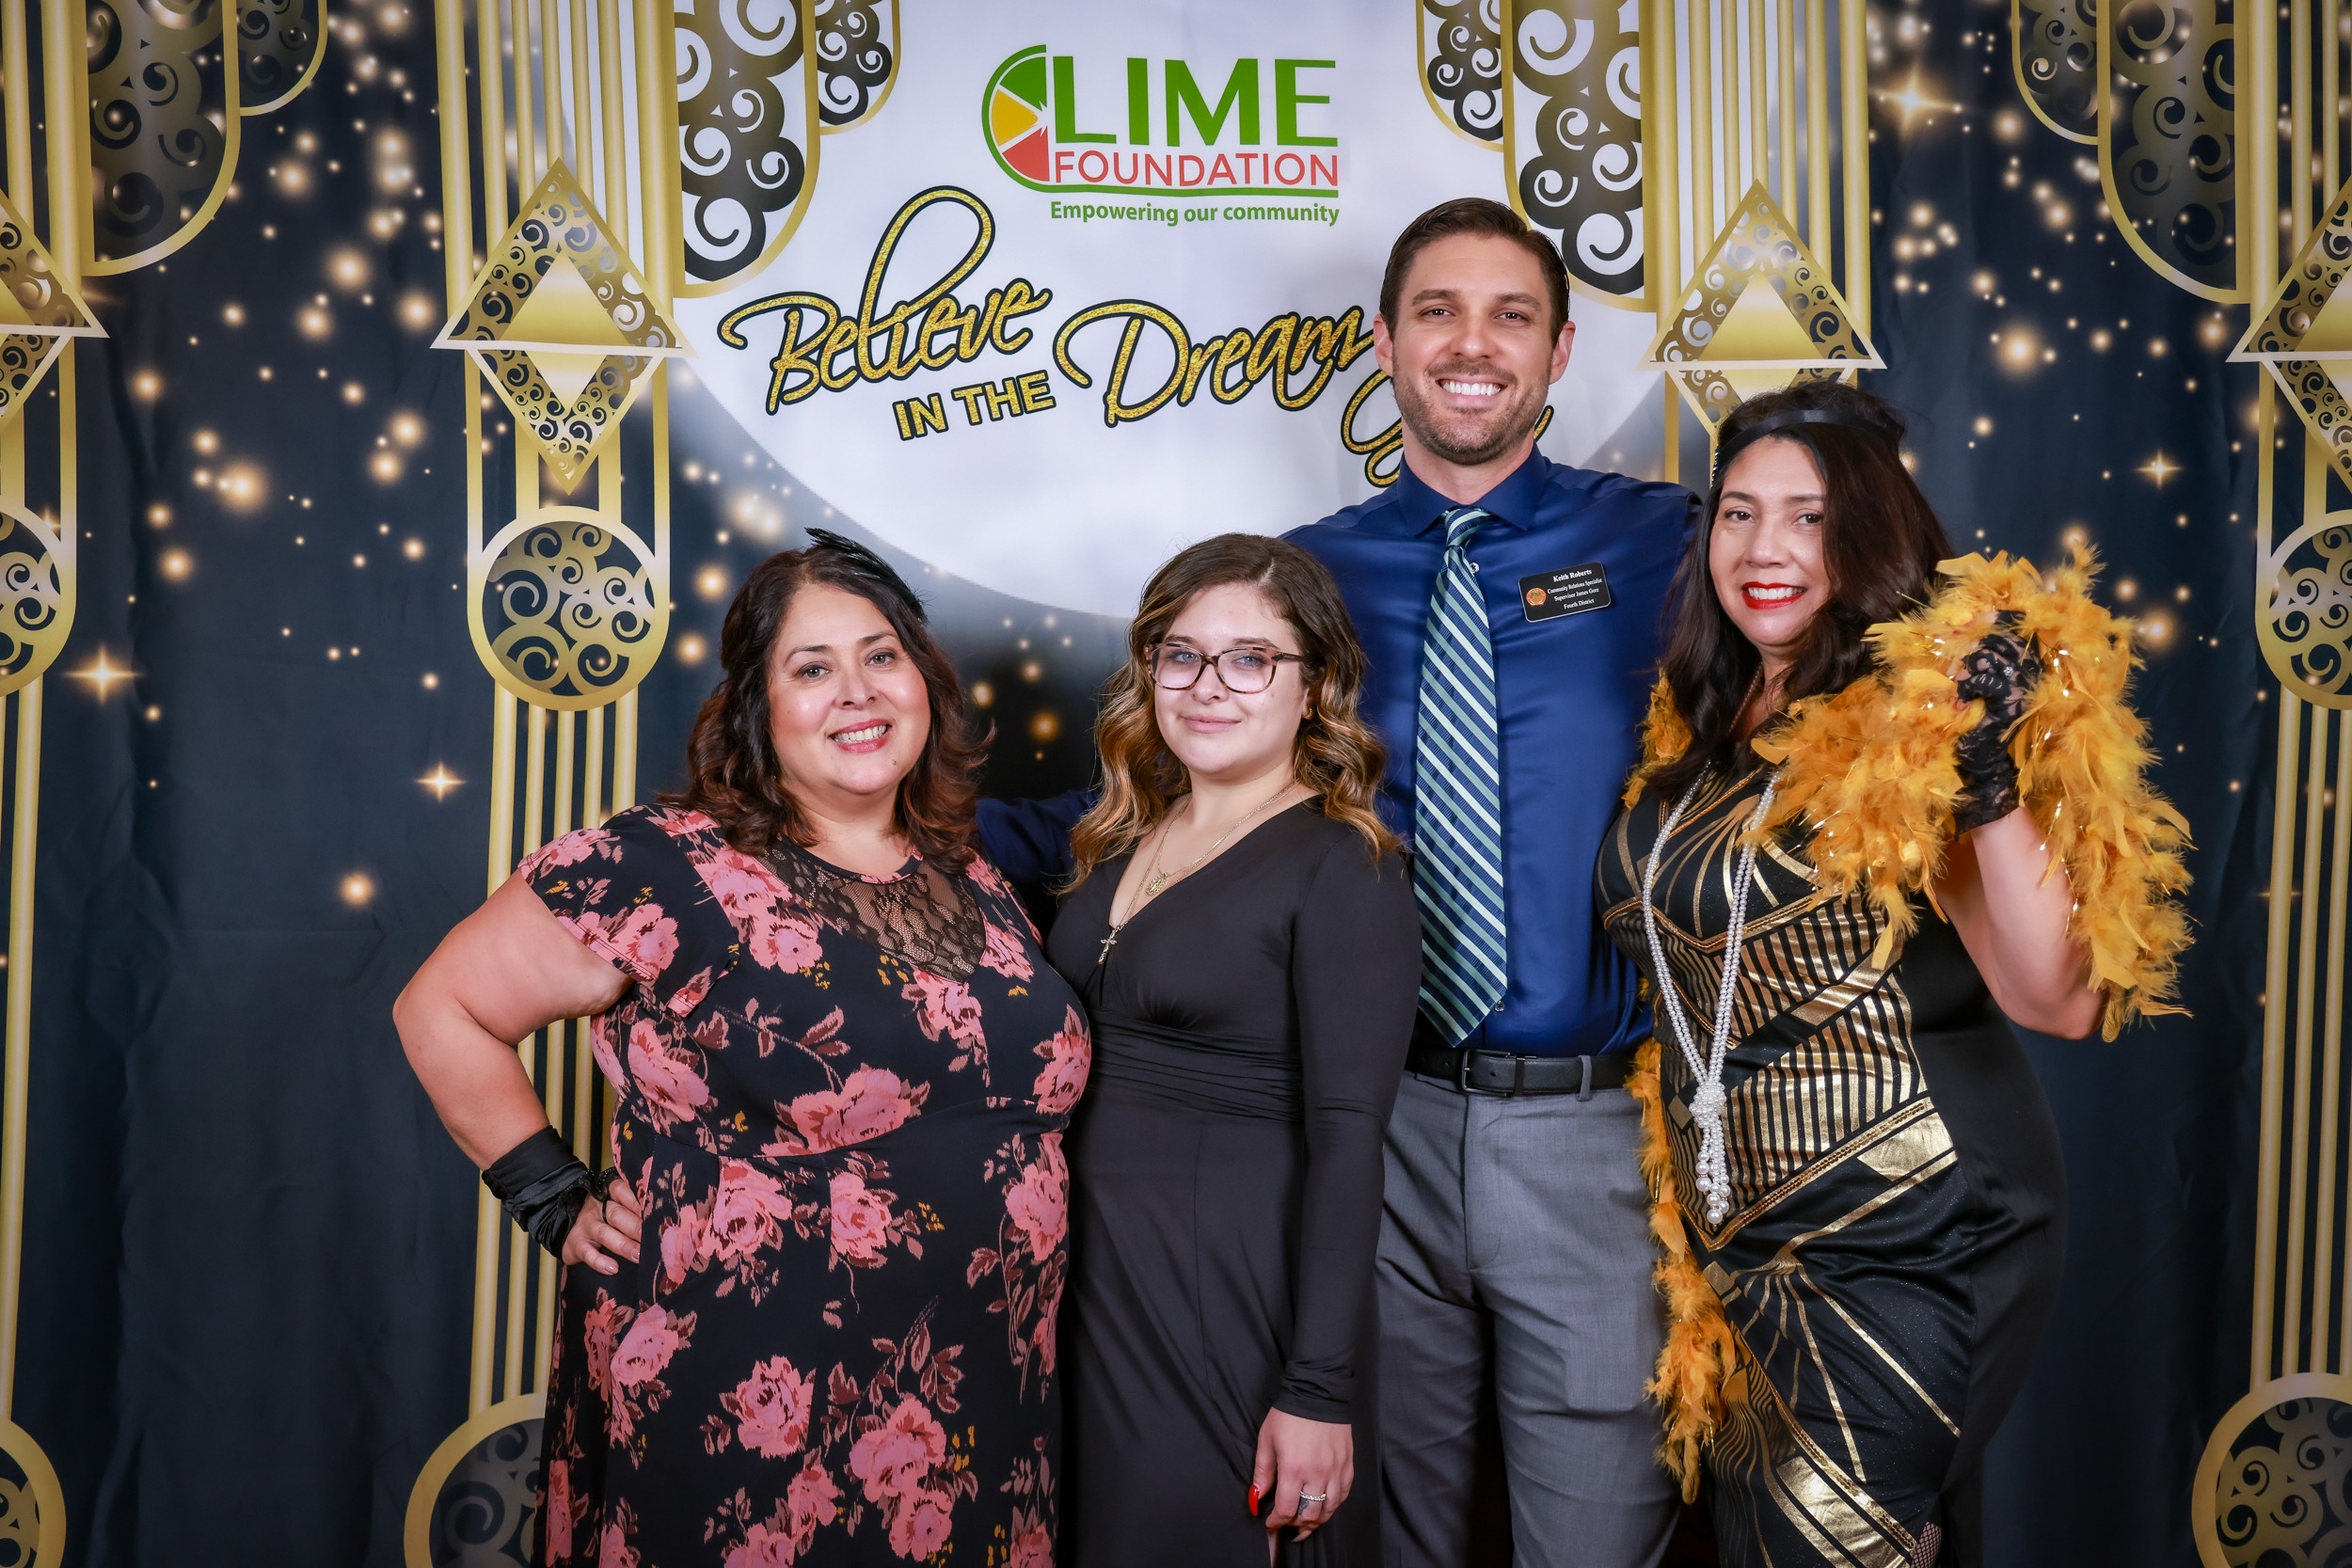 A group of people posing for a photo at a party hosted by The LIME Foundation of Santa Rosa.